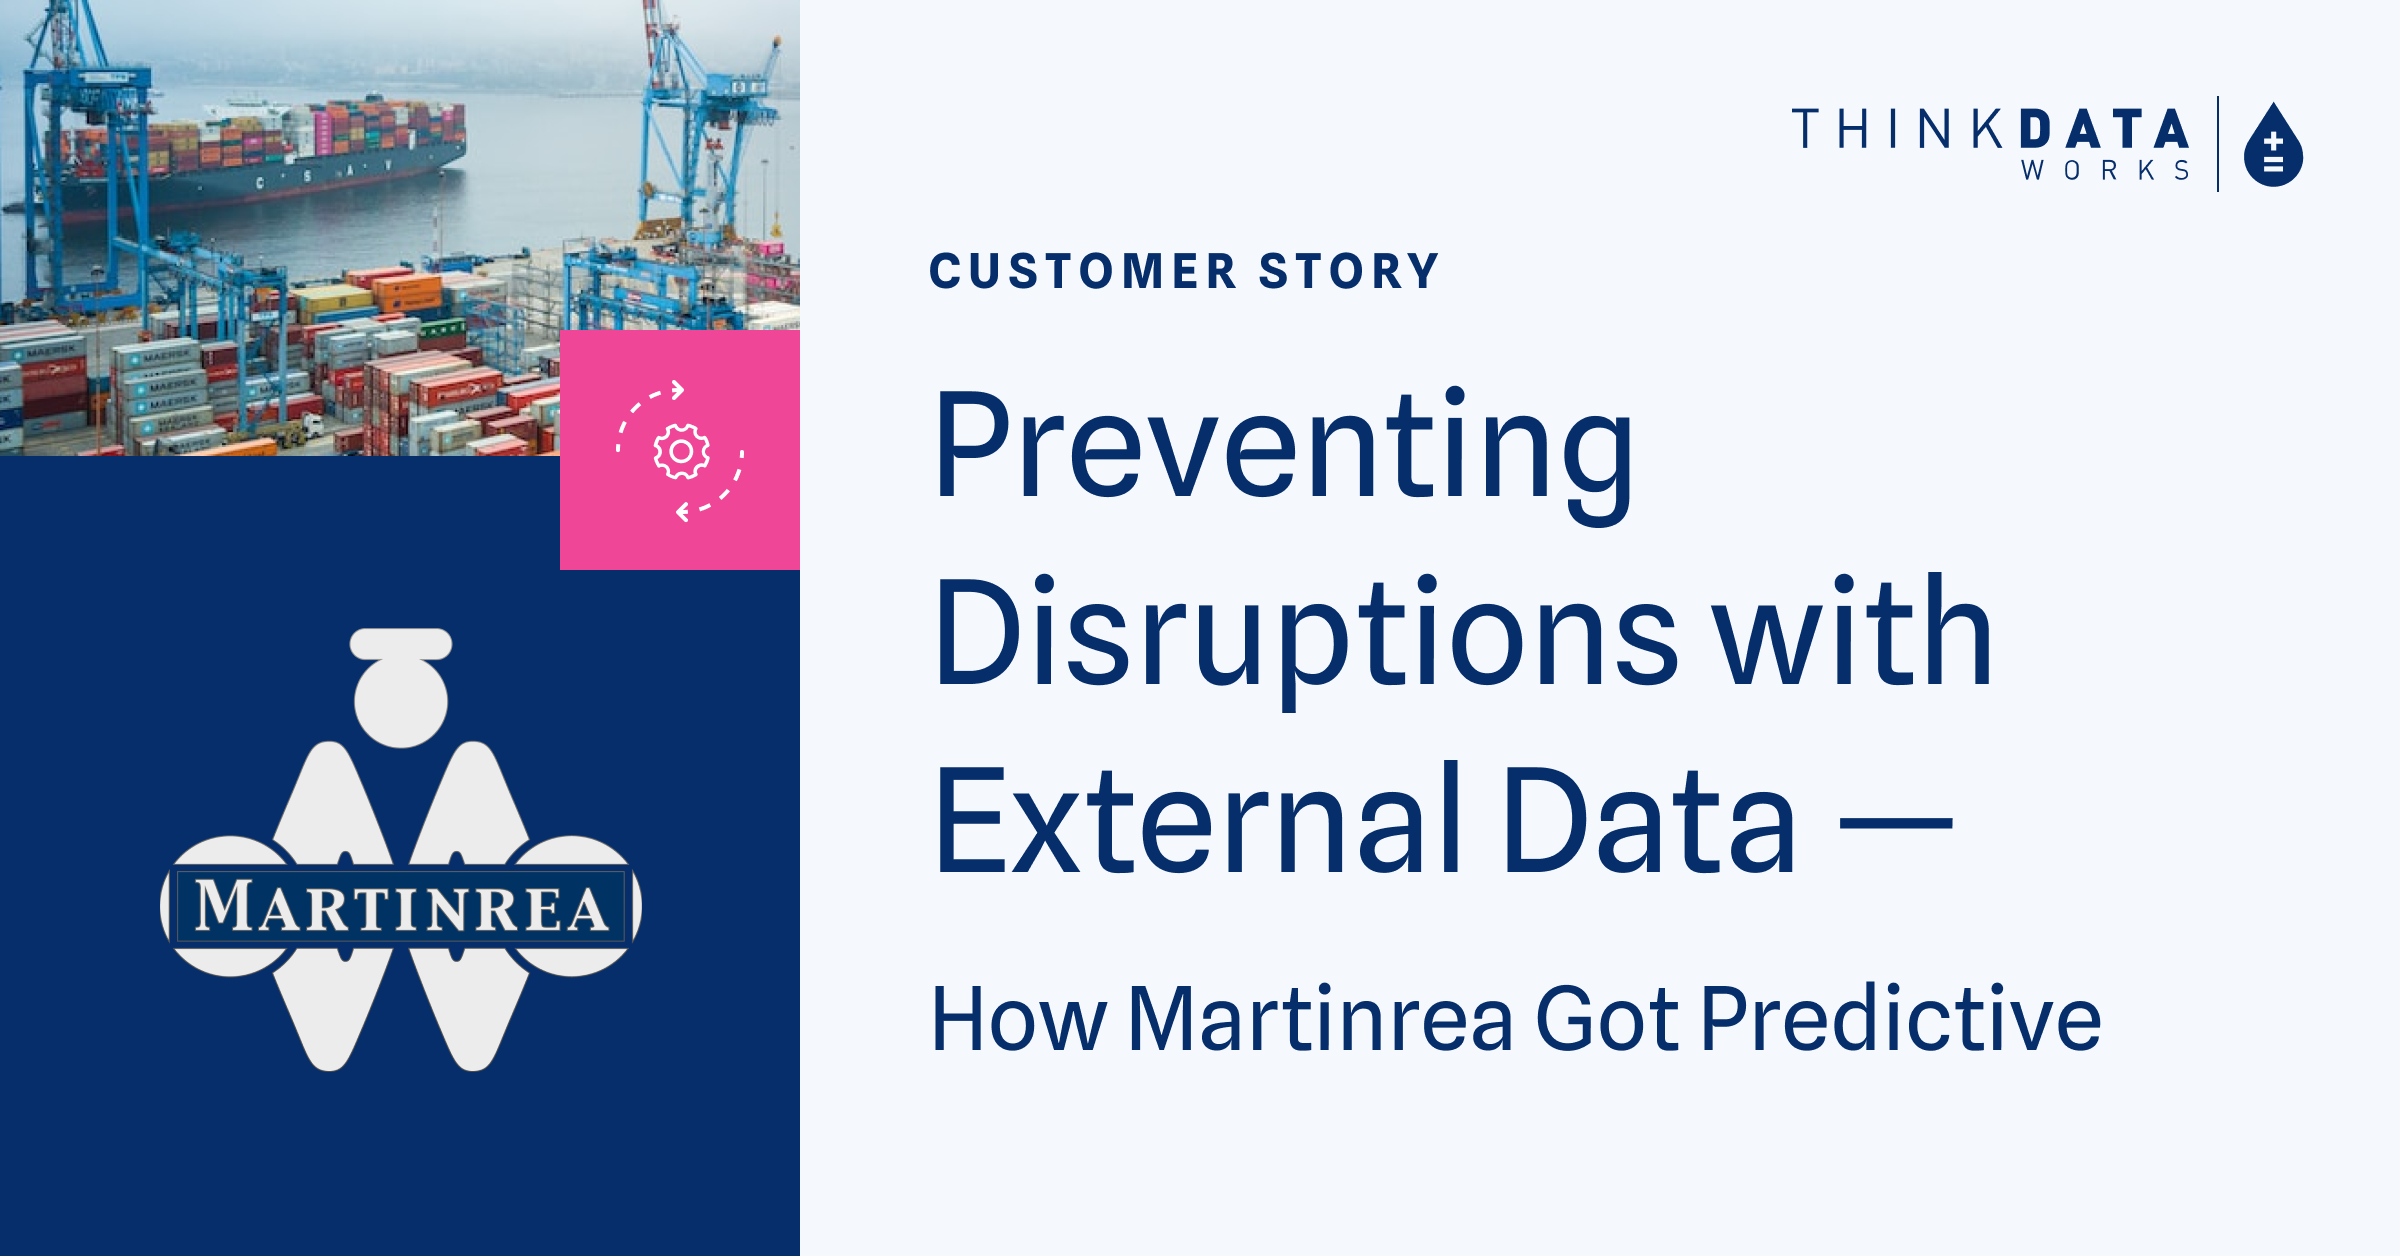 Martinrea supply chain resiliency case study